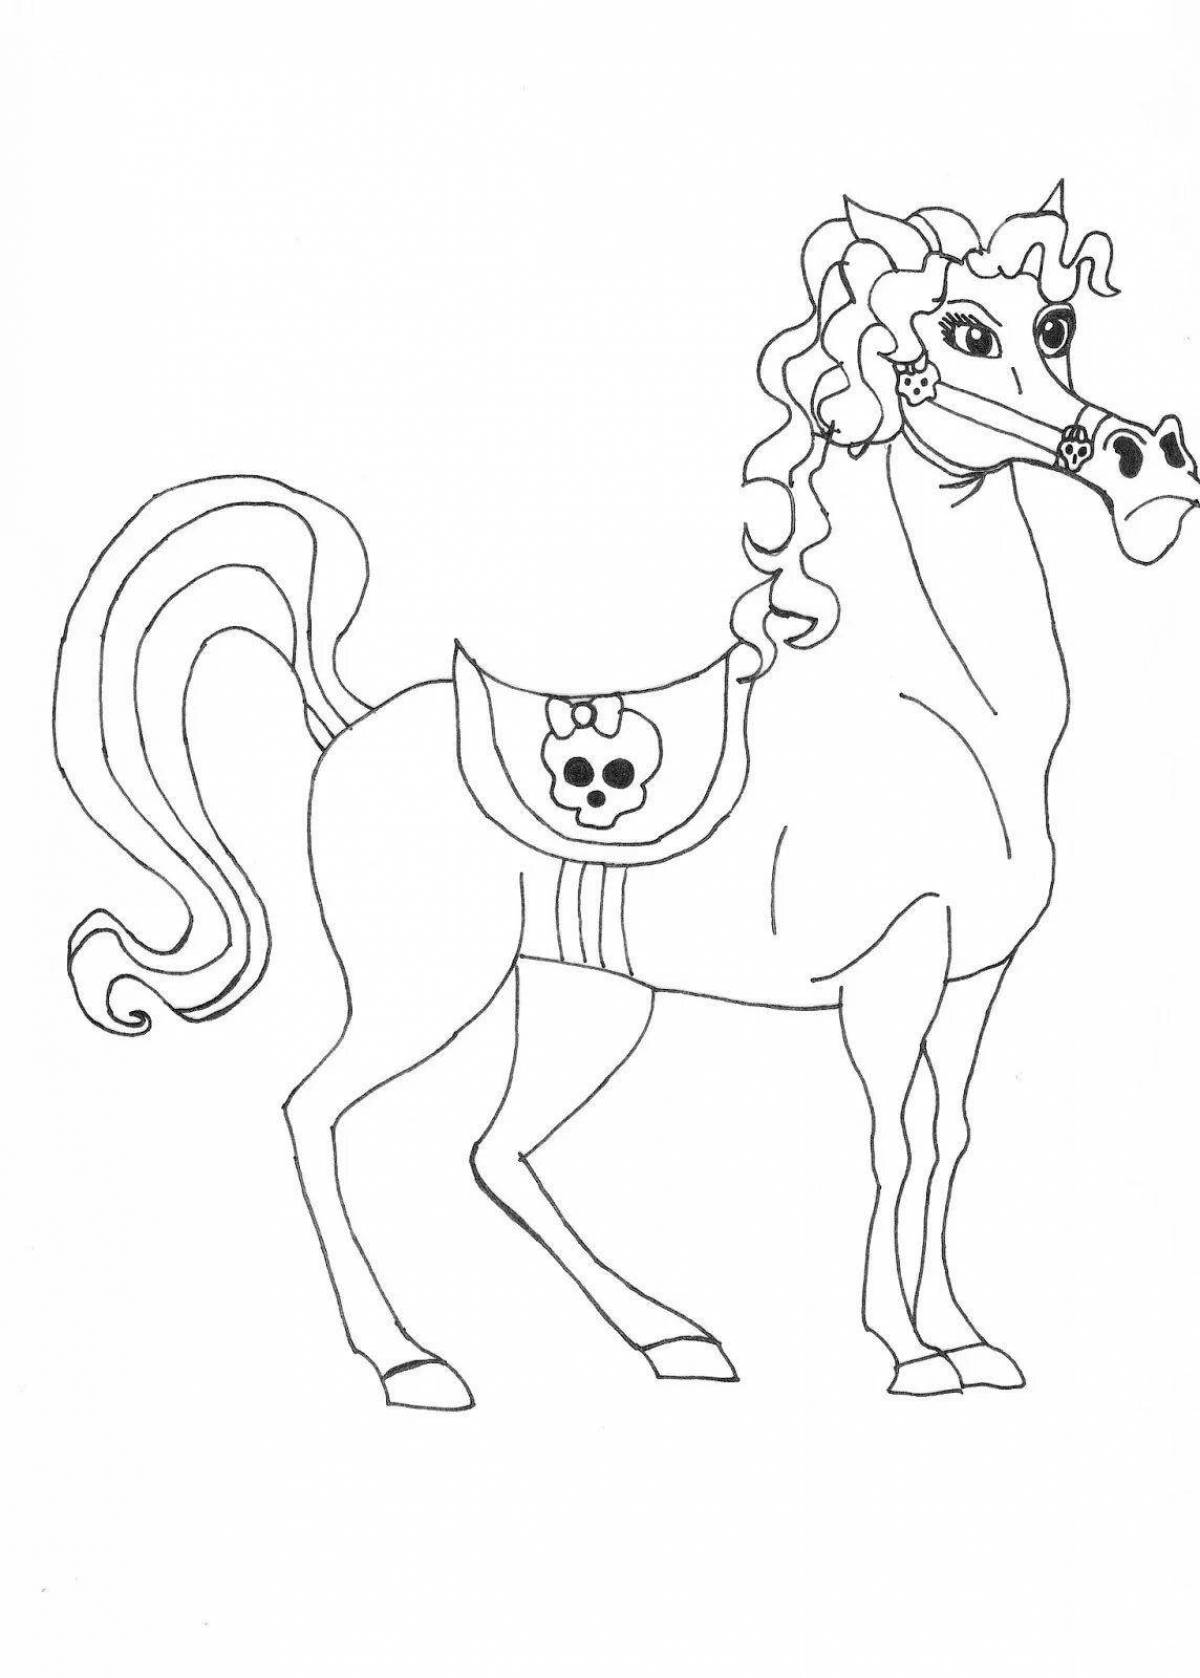 Grand coloring page long horse monster